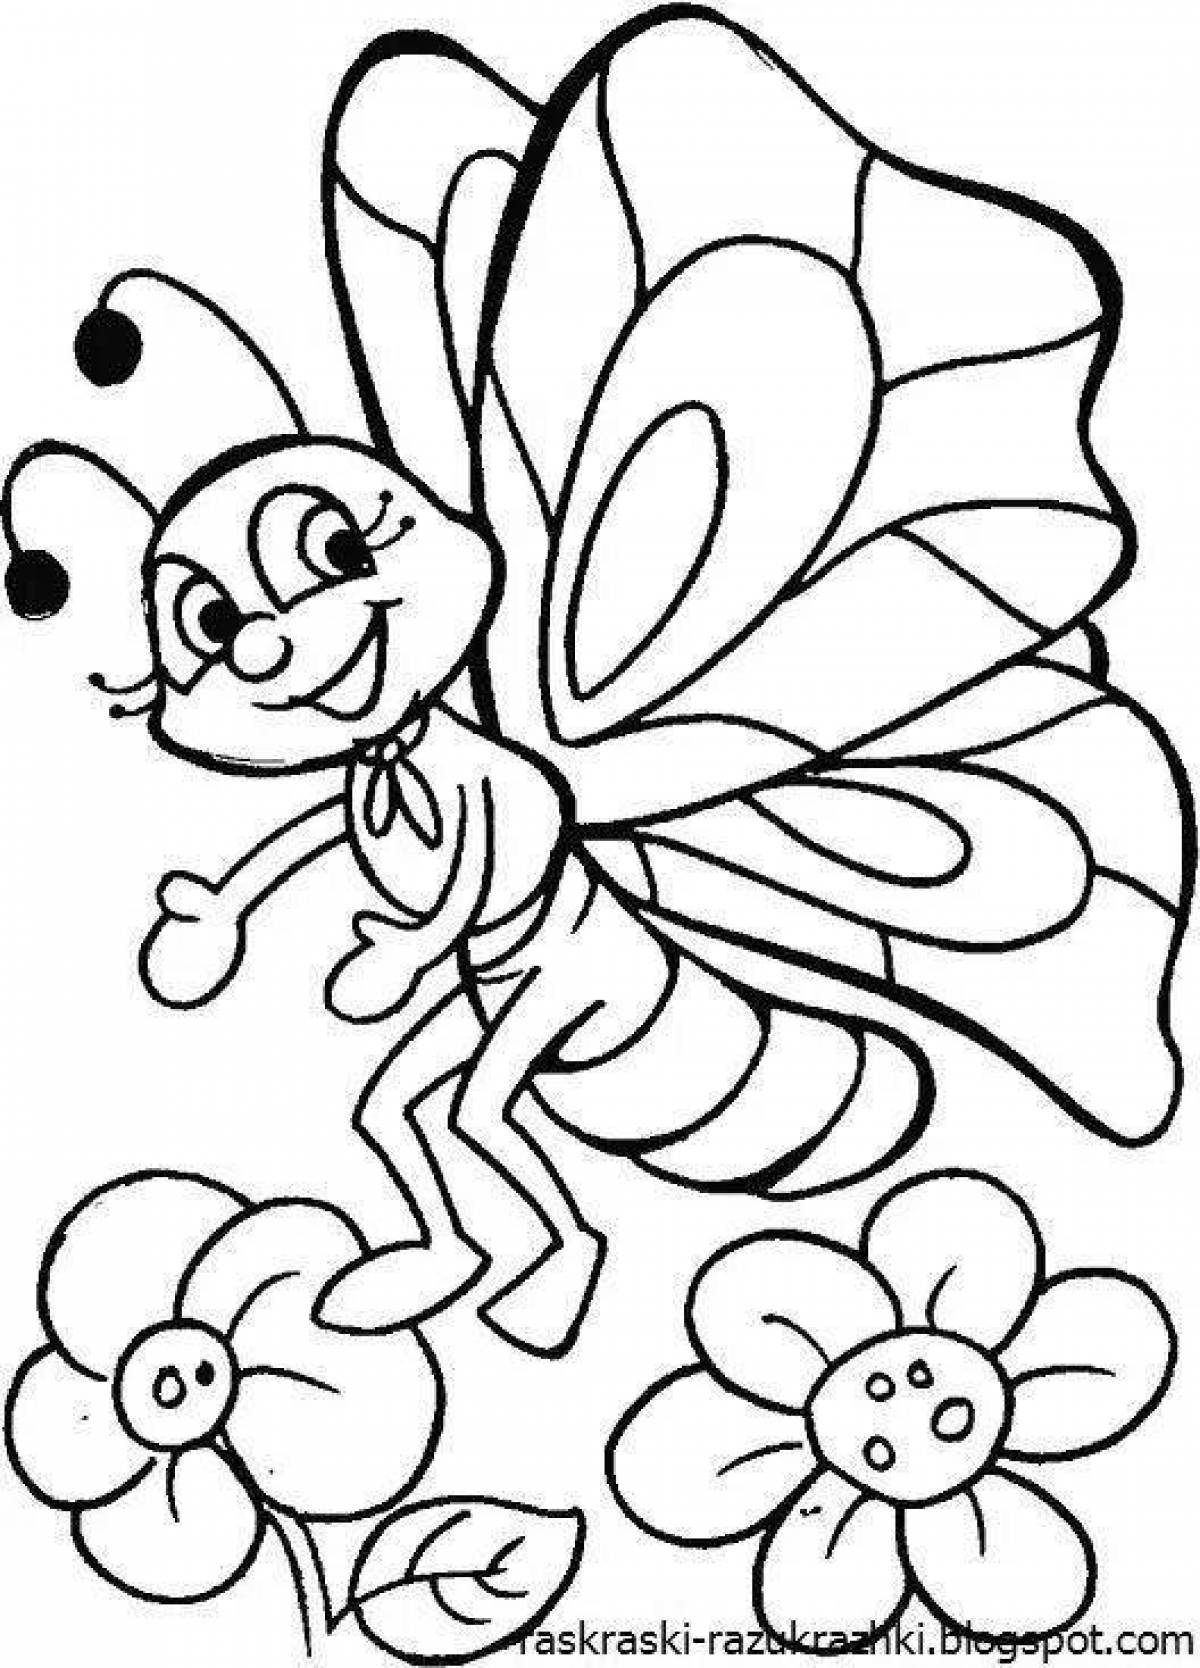 Amazing insect coloring page for 4-5 year olds